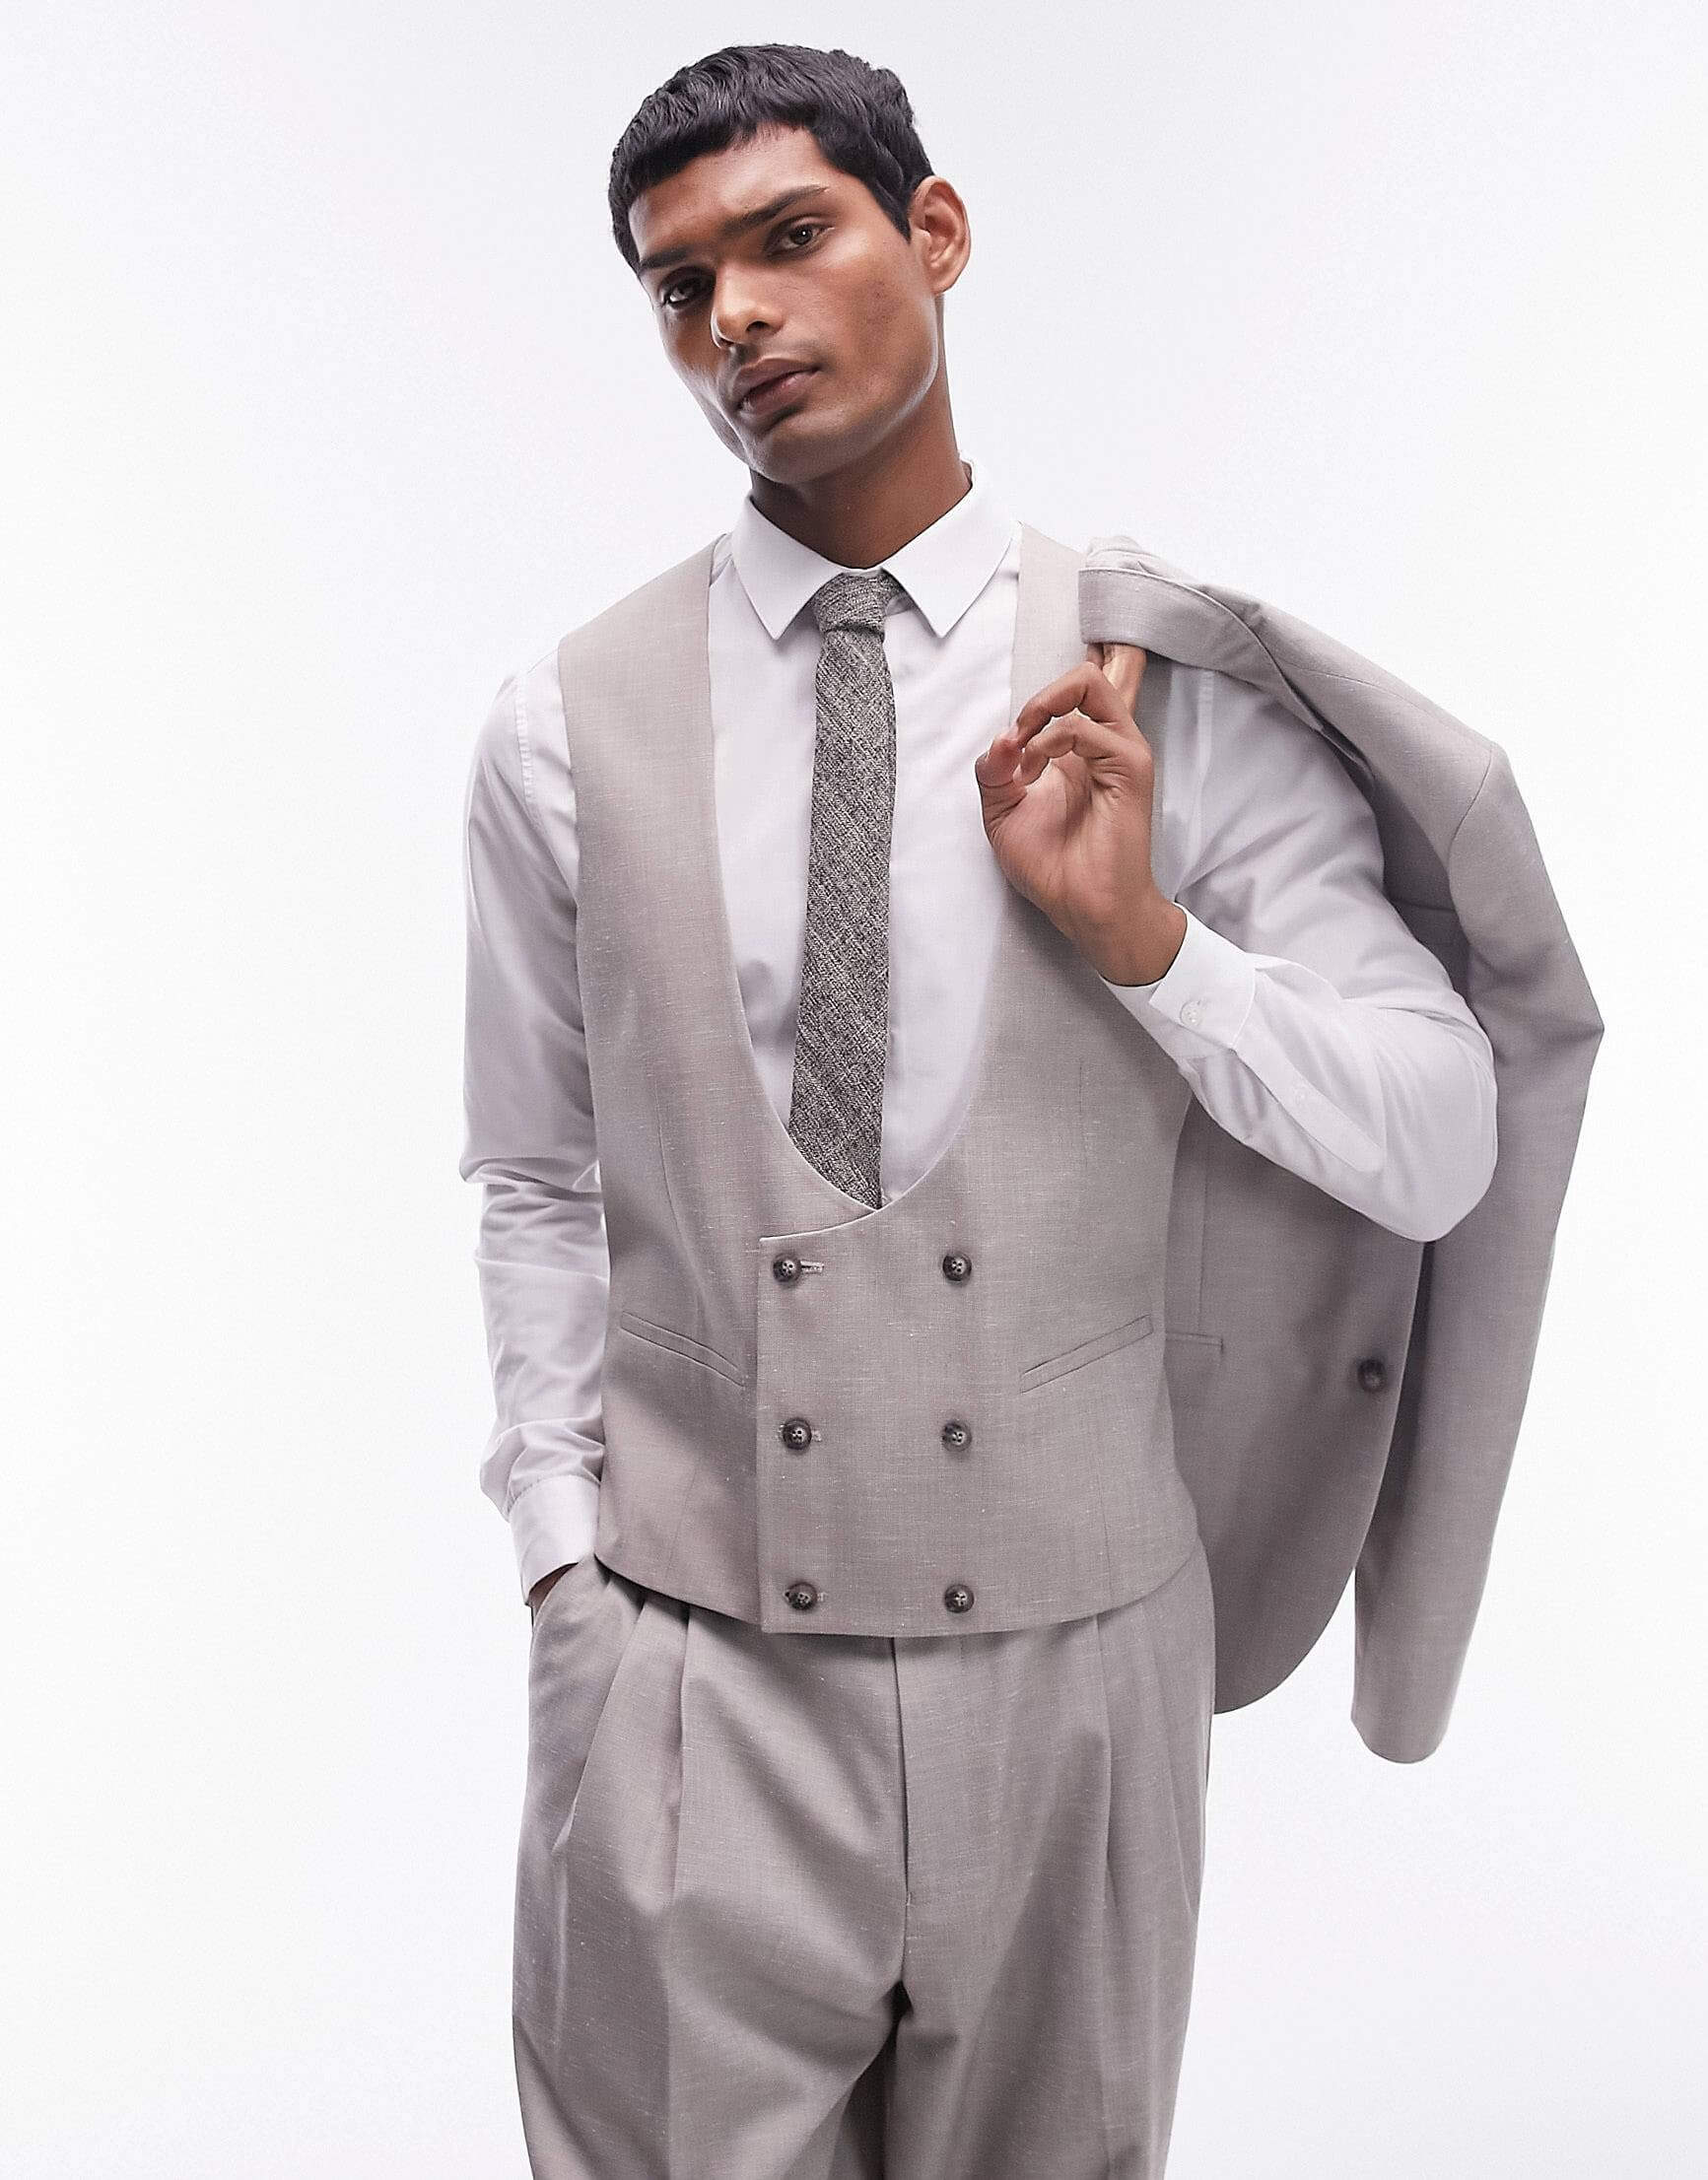 Жилет Topman With A Fitted Cut Made Of Linen-Blend Material, серо-бежевый шорты topman with a linen blend серо бежевый